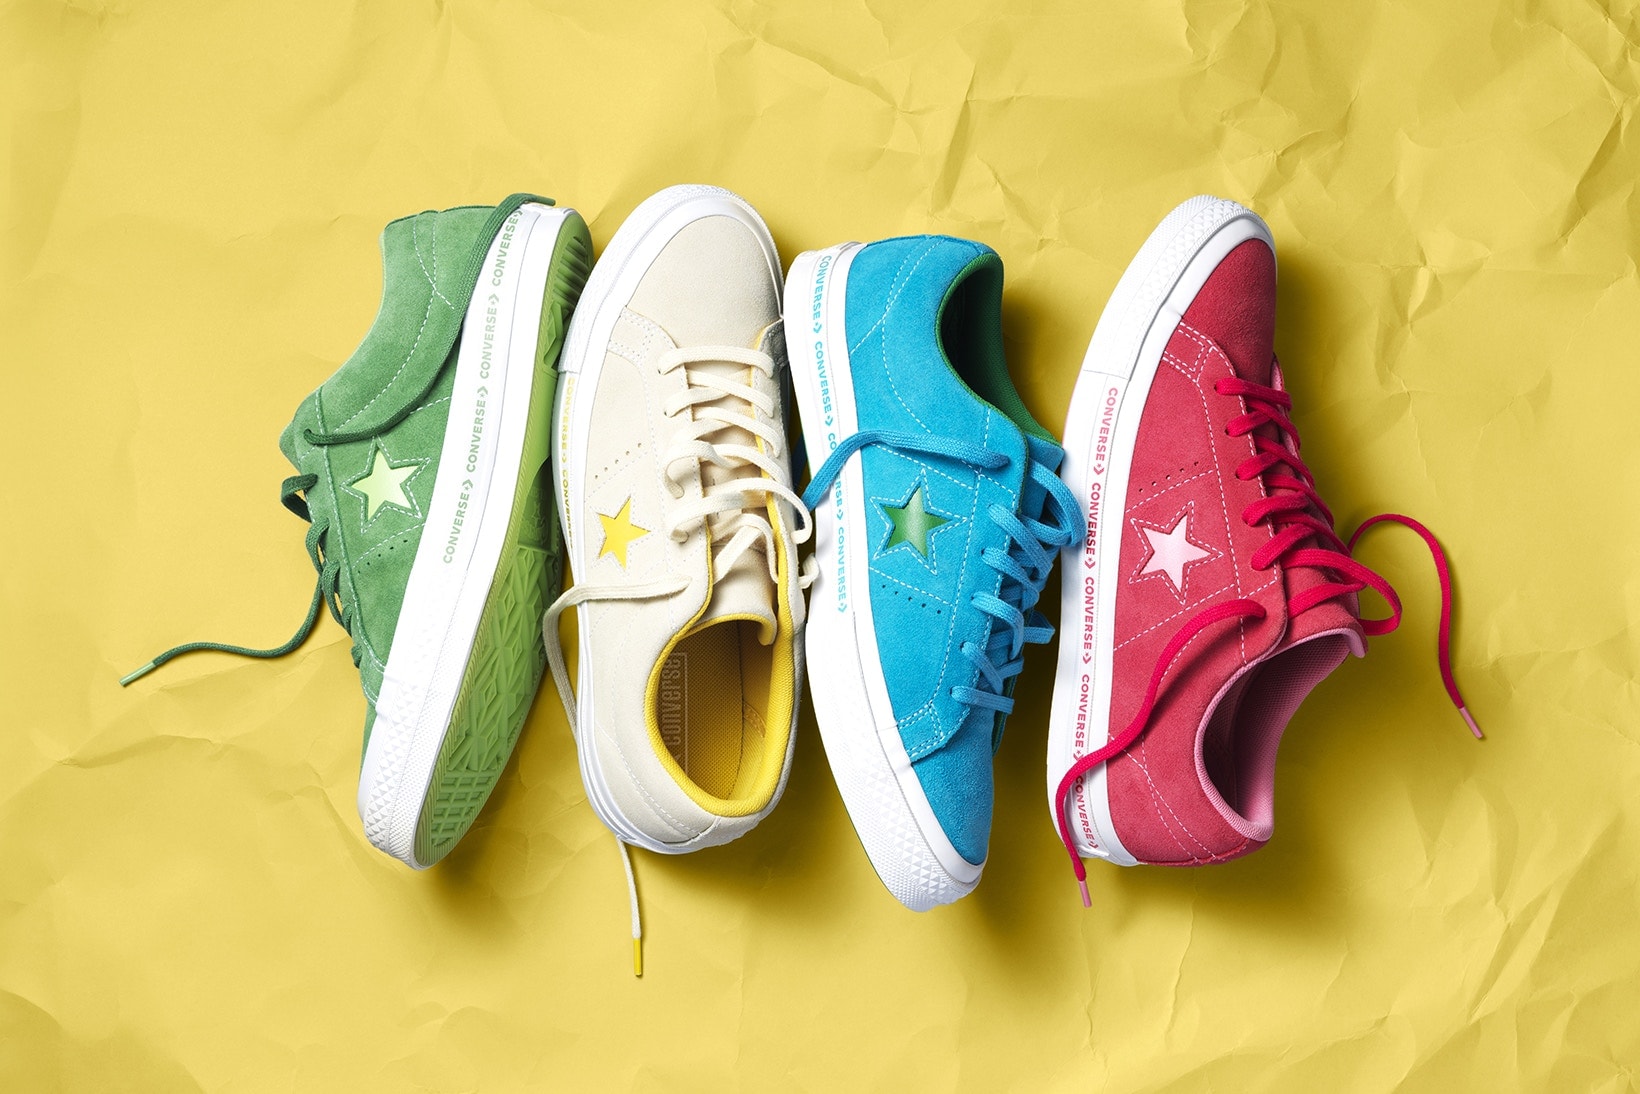 Converse One Star Spring 2018 Pack